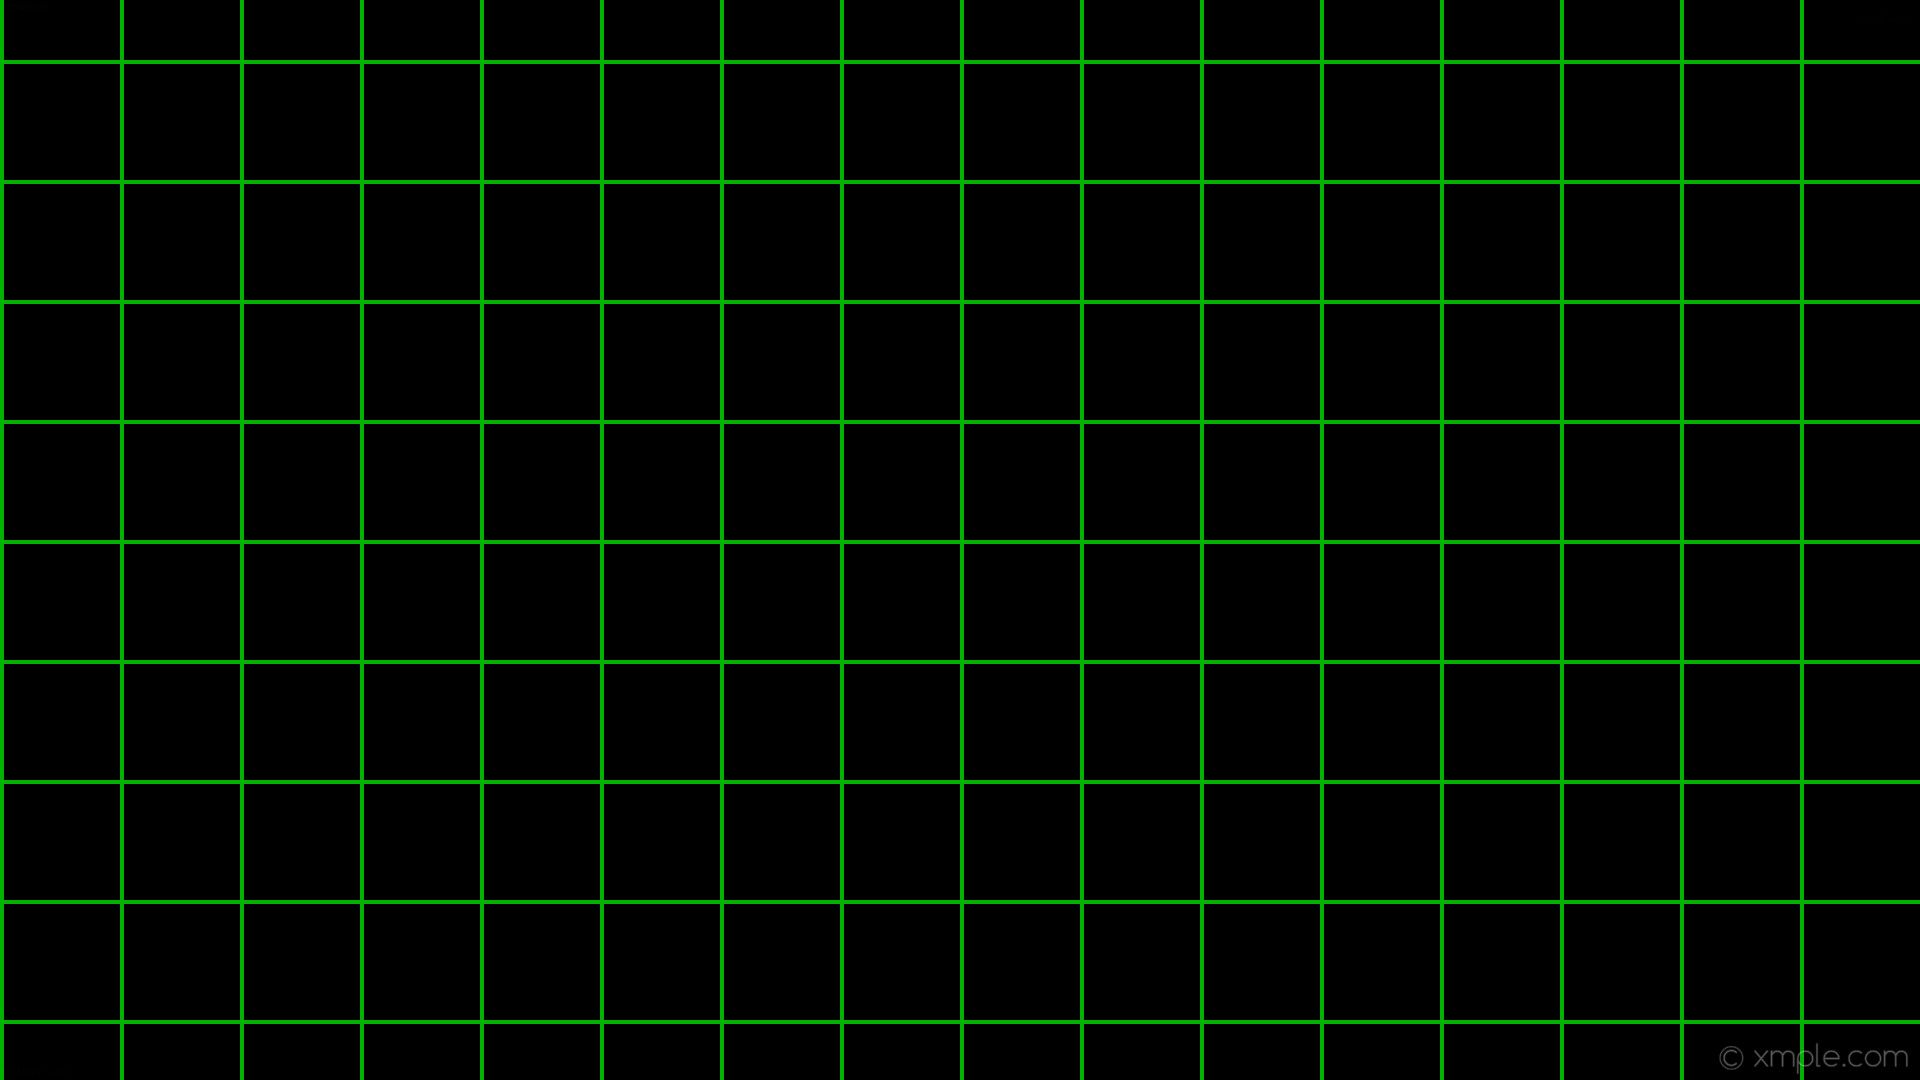 A black background with a green grid - Neon green, green, grid, lime green